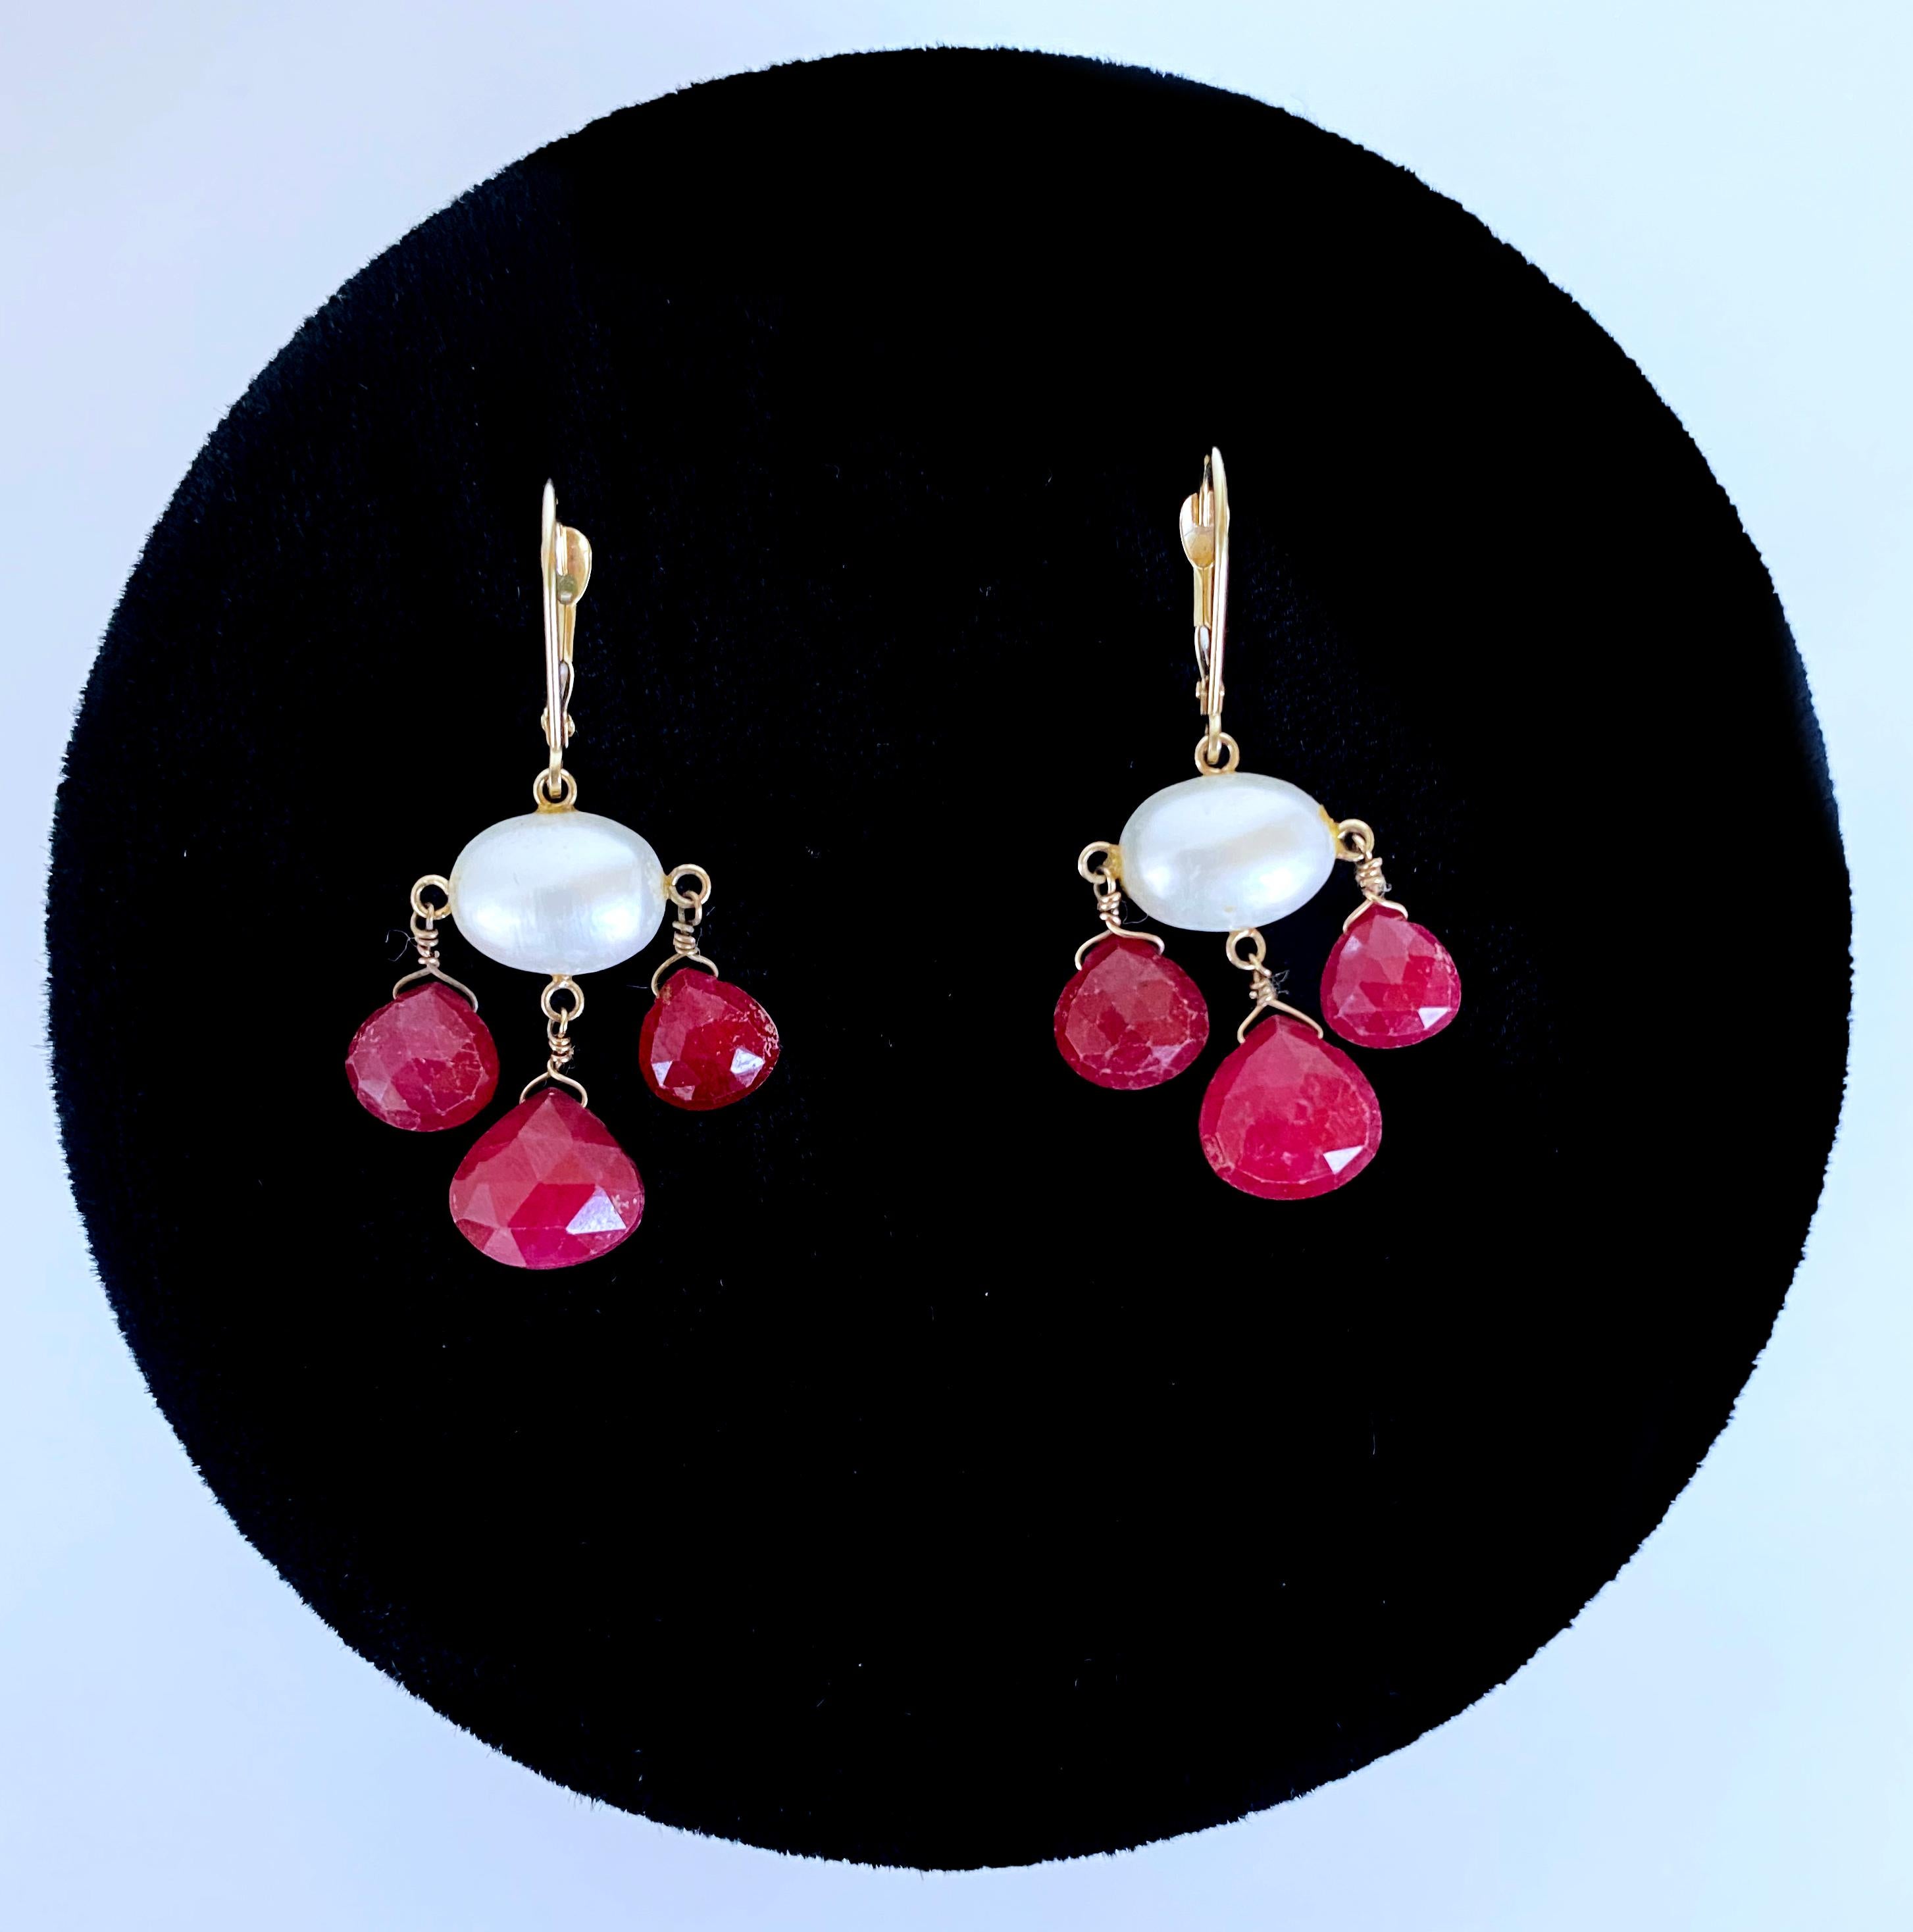 Simple and bold pair by Marina J. Each earring features 3 Graduated and faceted Pear shaped Rubies that display a vivid and radiant Hot Pink / Red Color. The three magnificent Rubies in each pair hang off a high luster Baroque Pearl which glistens